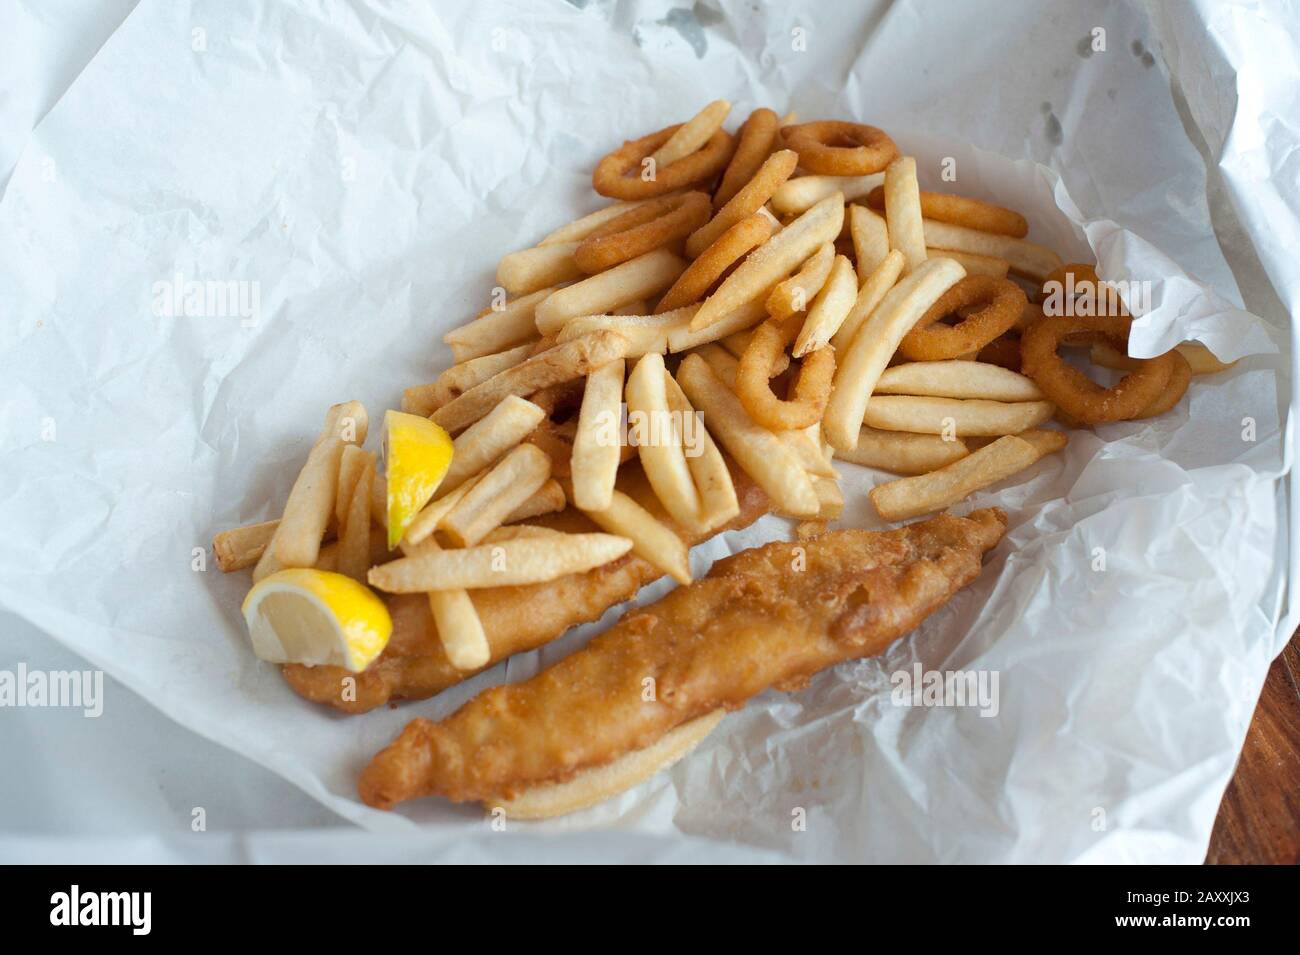 Overhead view of fried fish fillets in batter, calamari rings and potato chips on crumpled paper Stock Photo